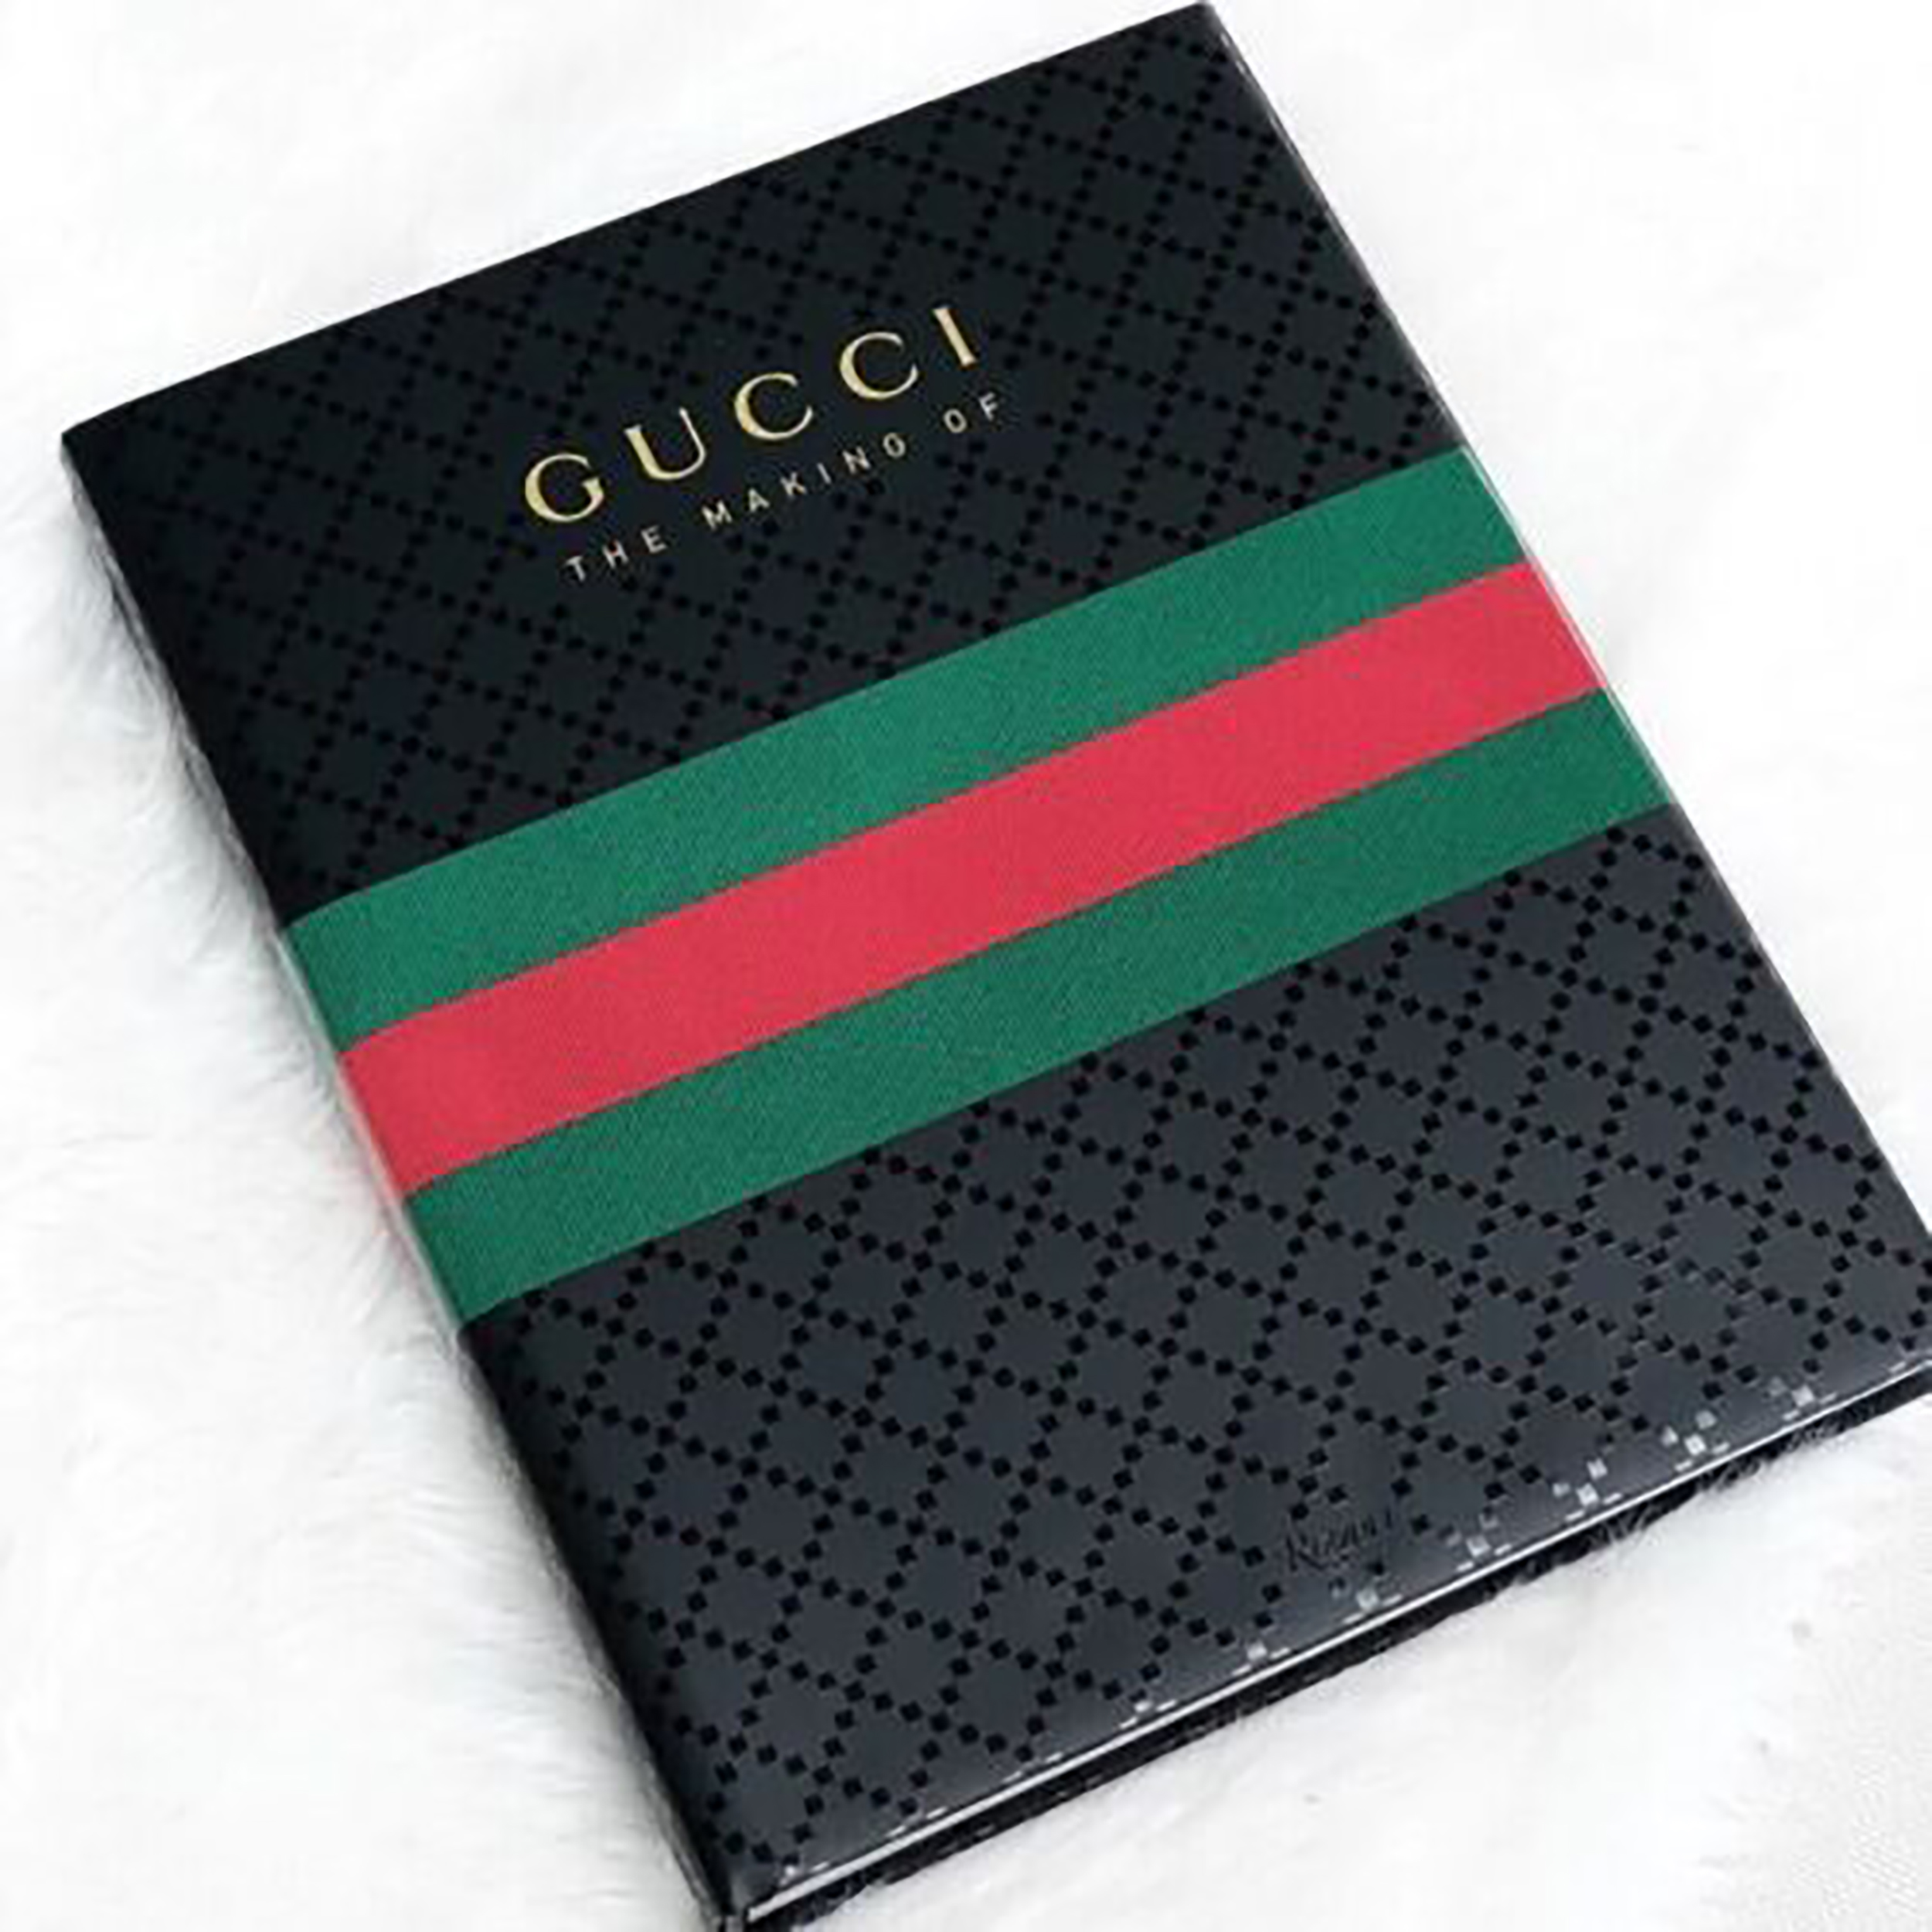 Gucci: The Making of